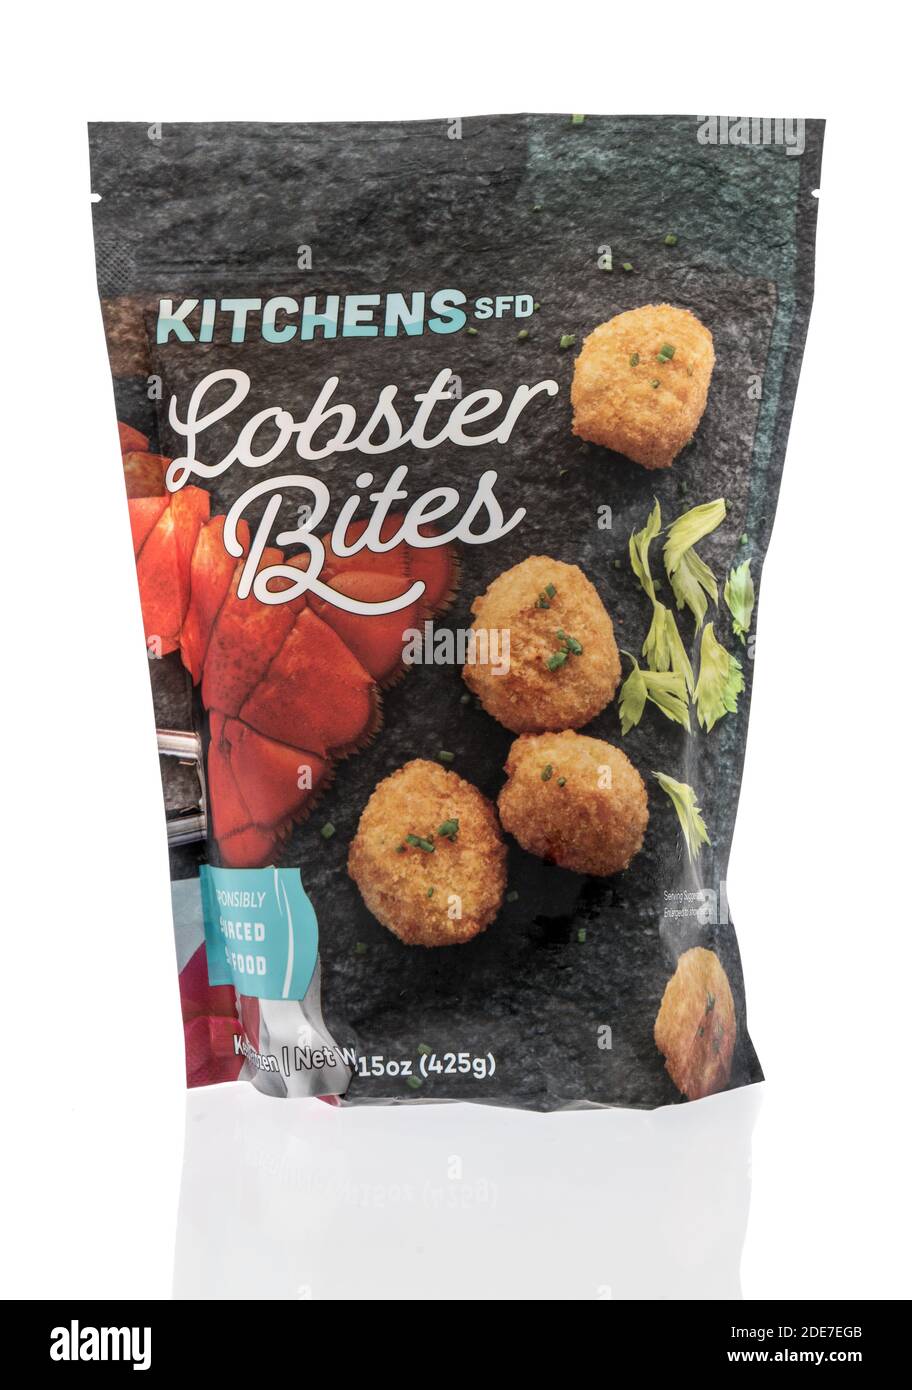 Winneconne, WI -29 November 2020:  A package of Kitchens SFD lobster bites on an isolated background. Stock Photo